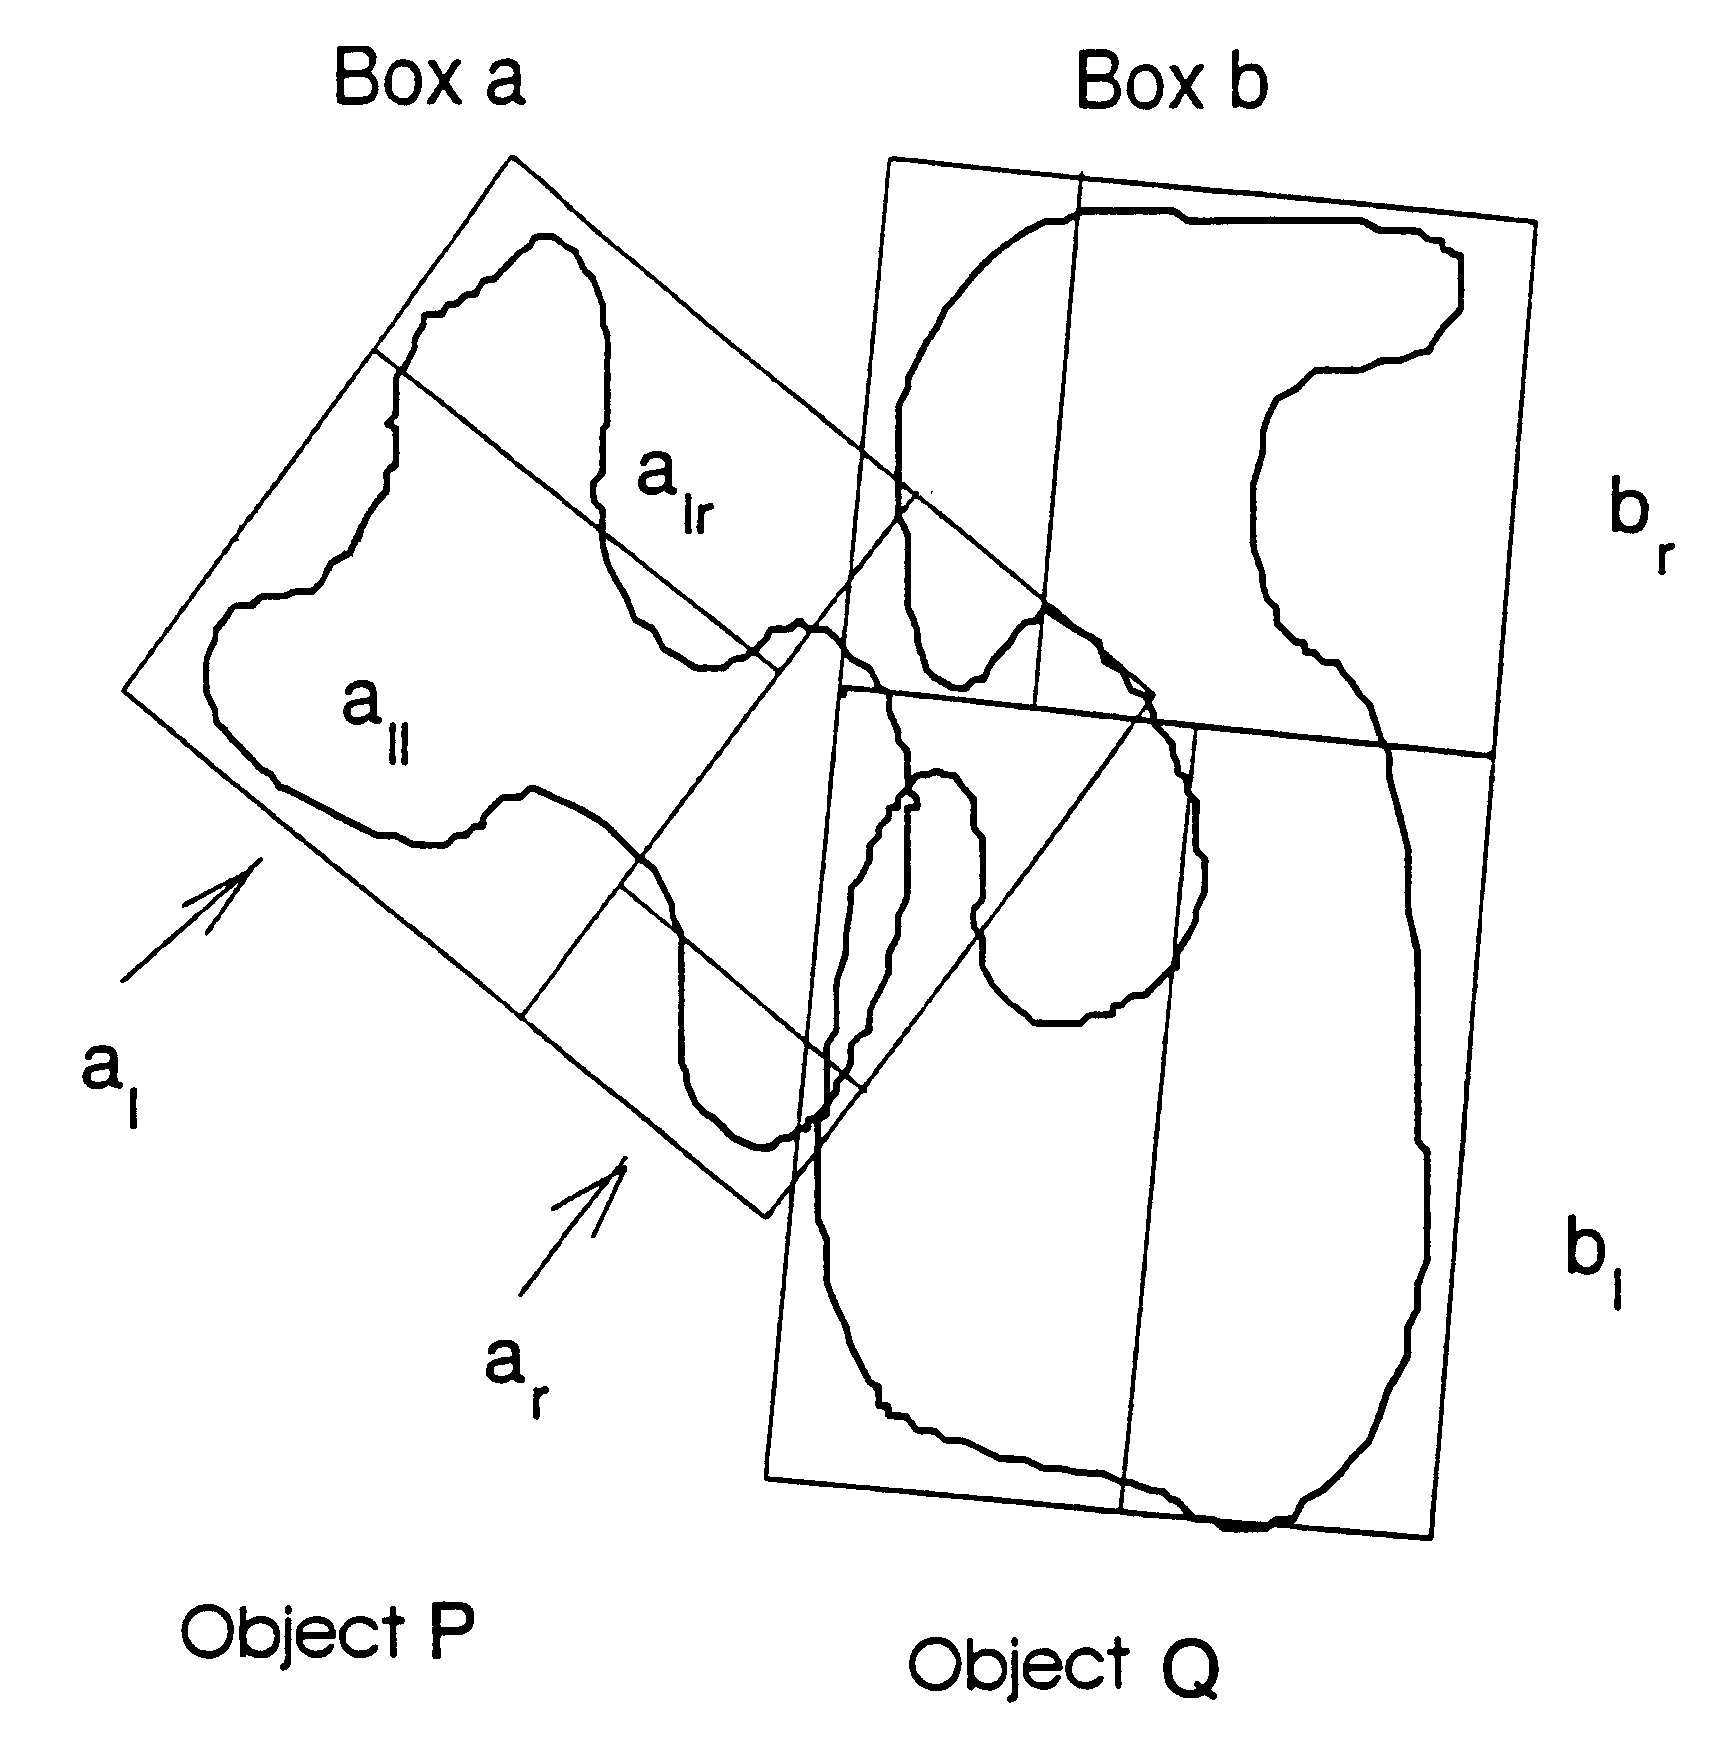 Process and device for collision detection of objects